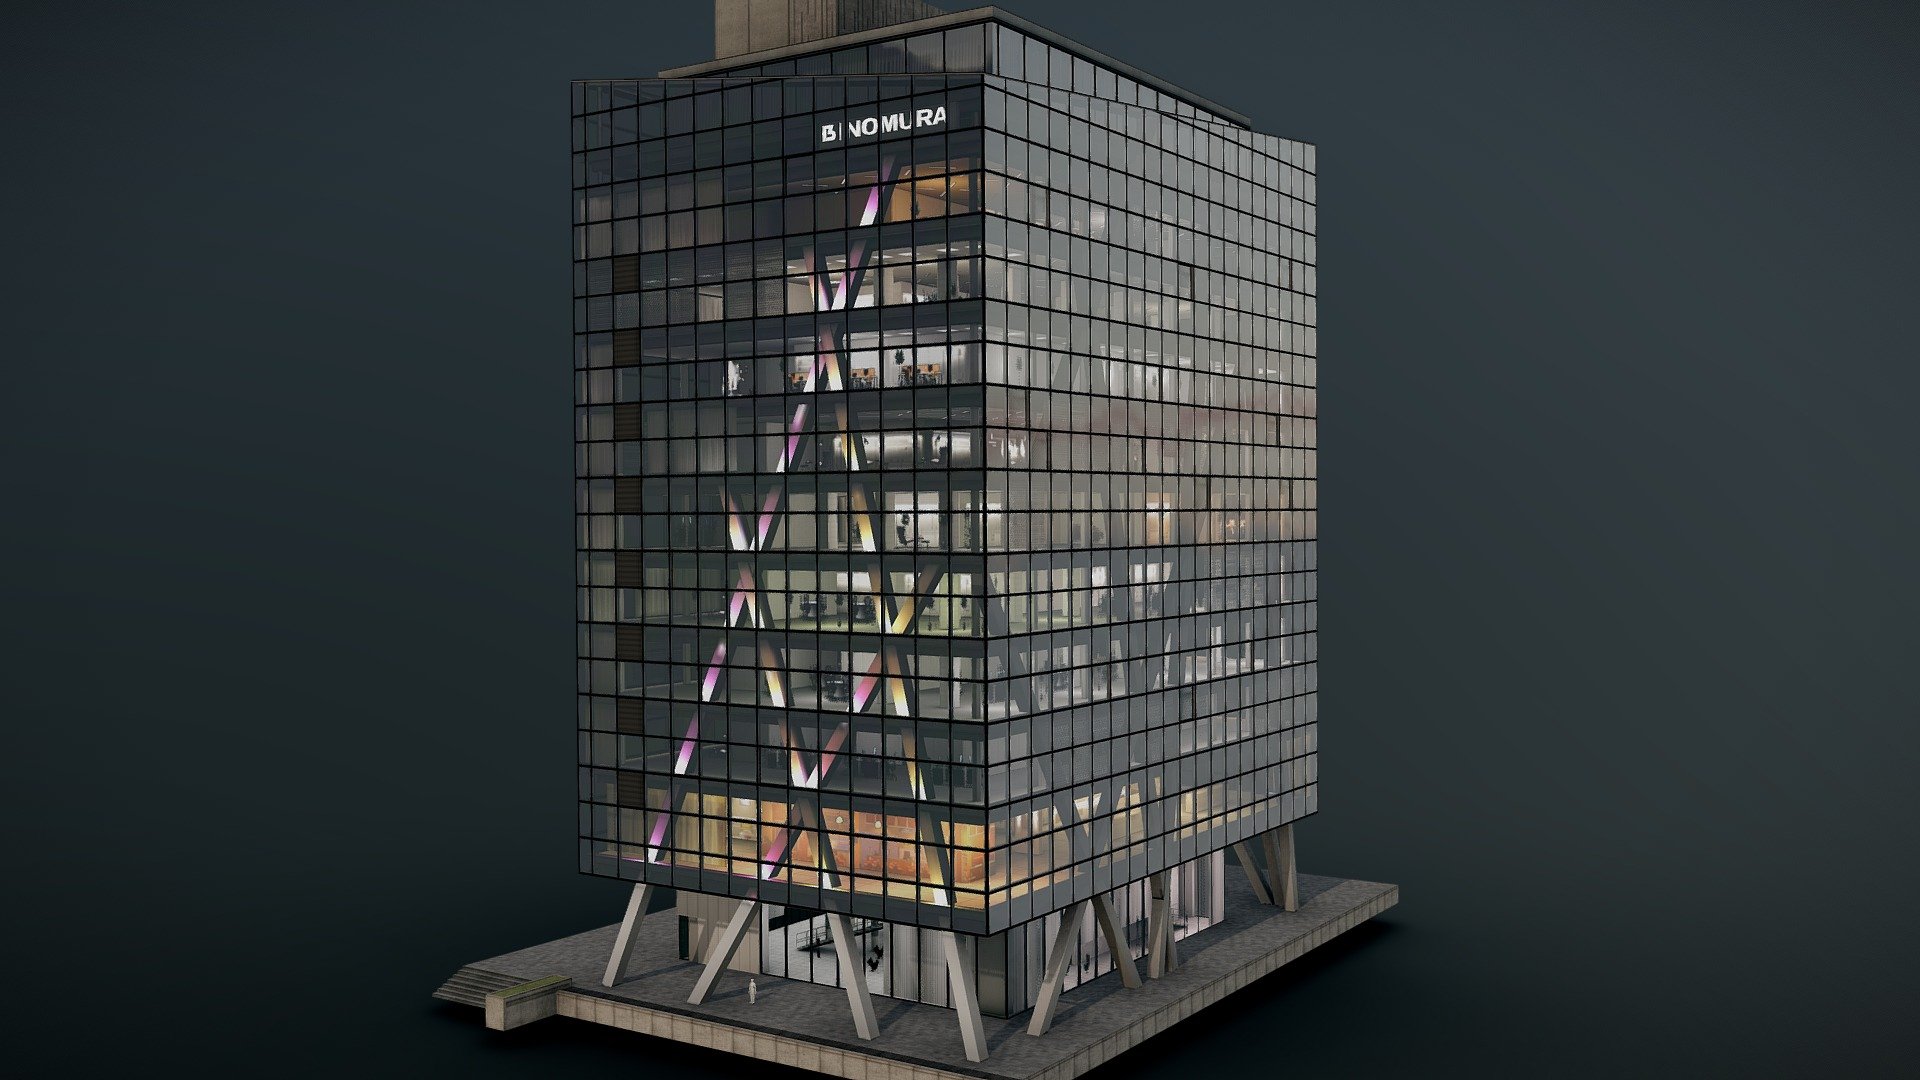 2-chōme-3-4 Daiba, Minato City, Tokyo 135-0091, Japan

Renders:





Low poly and game-ready Tokyo Corperate Office building with interiors with baked-in lighting.

Scene Information:




Modelled in Blender 3.3.2

Fully UV unwrapped

All materials are allocated to their respective objects.

All meshes are named accordingly

Textures Included:




1k/2k PBR materials

2k/3k interior materials with Diffuse and 2 Emmisive maps, one for baked lighting and the other for only ceiling lights.

Formats:




.obj

.blend

.fbx

Enjoy and have a nice day 3d model